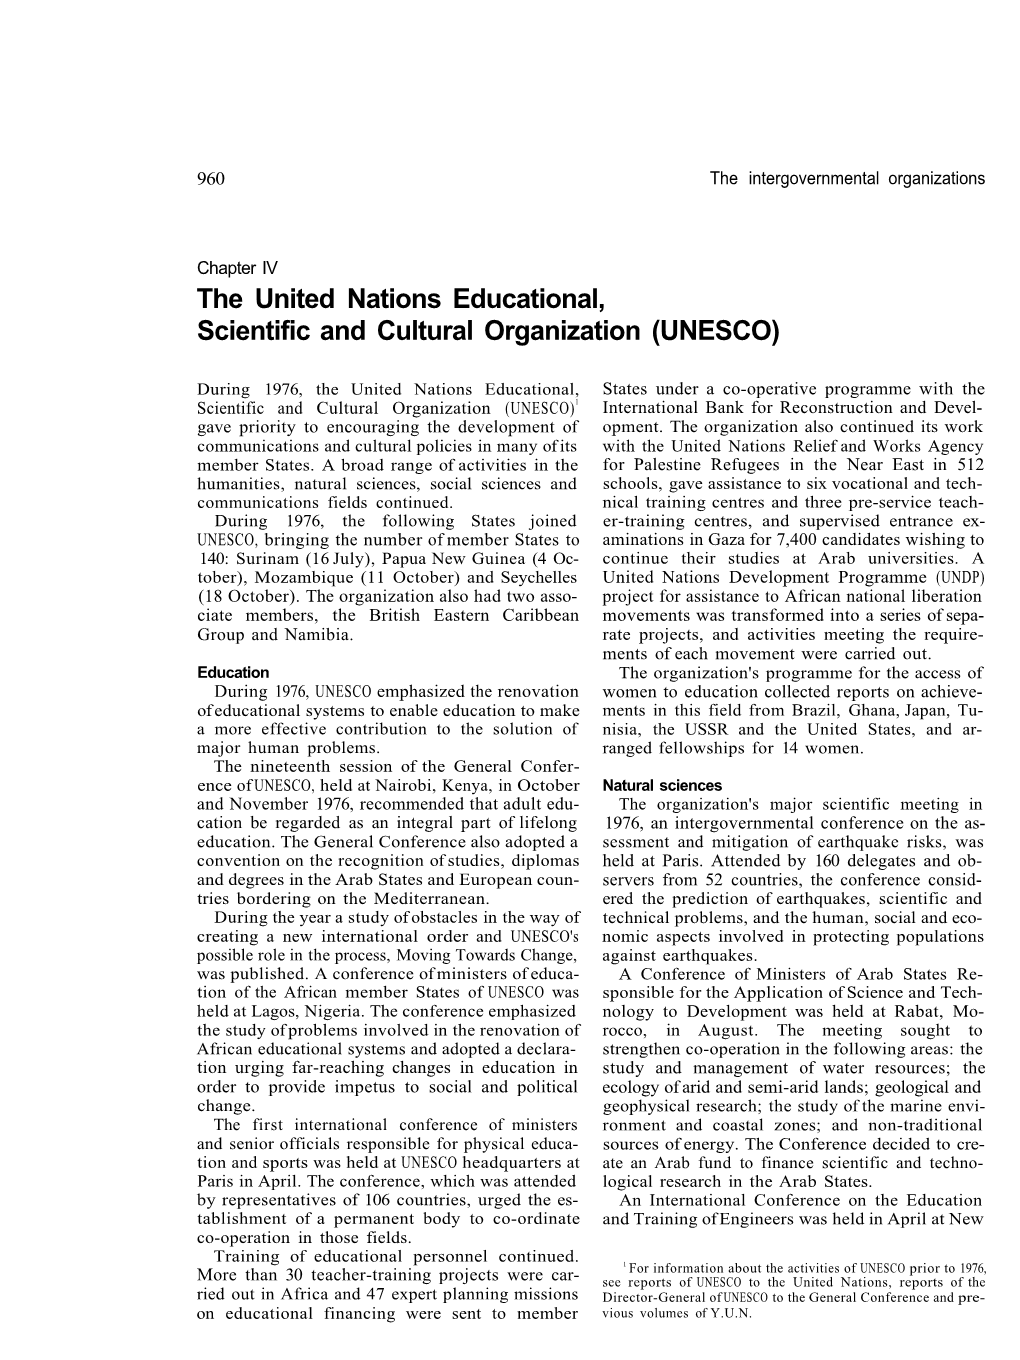 [ 1976 ] Part 2 Chapter 4 the United Nations Educational, Scientific And